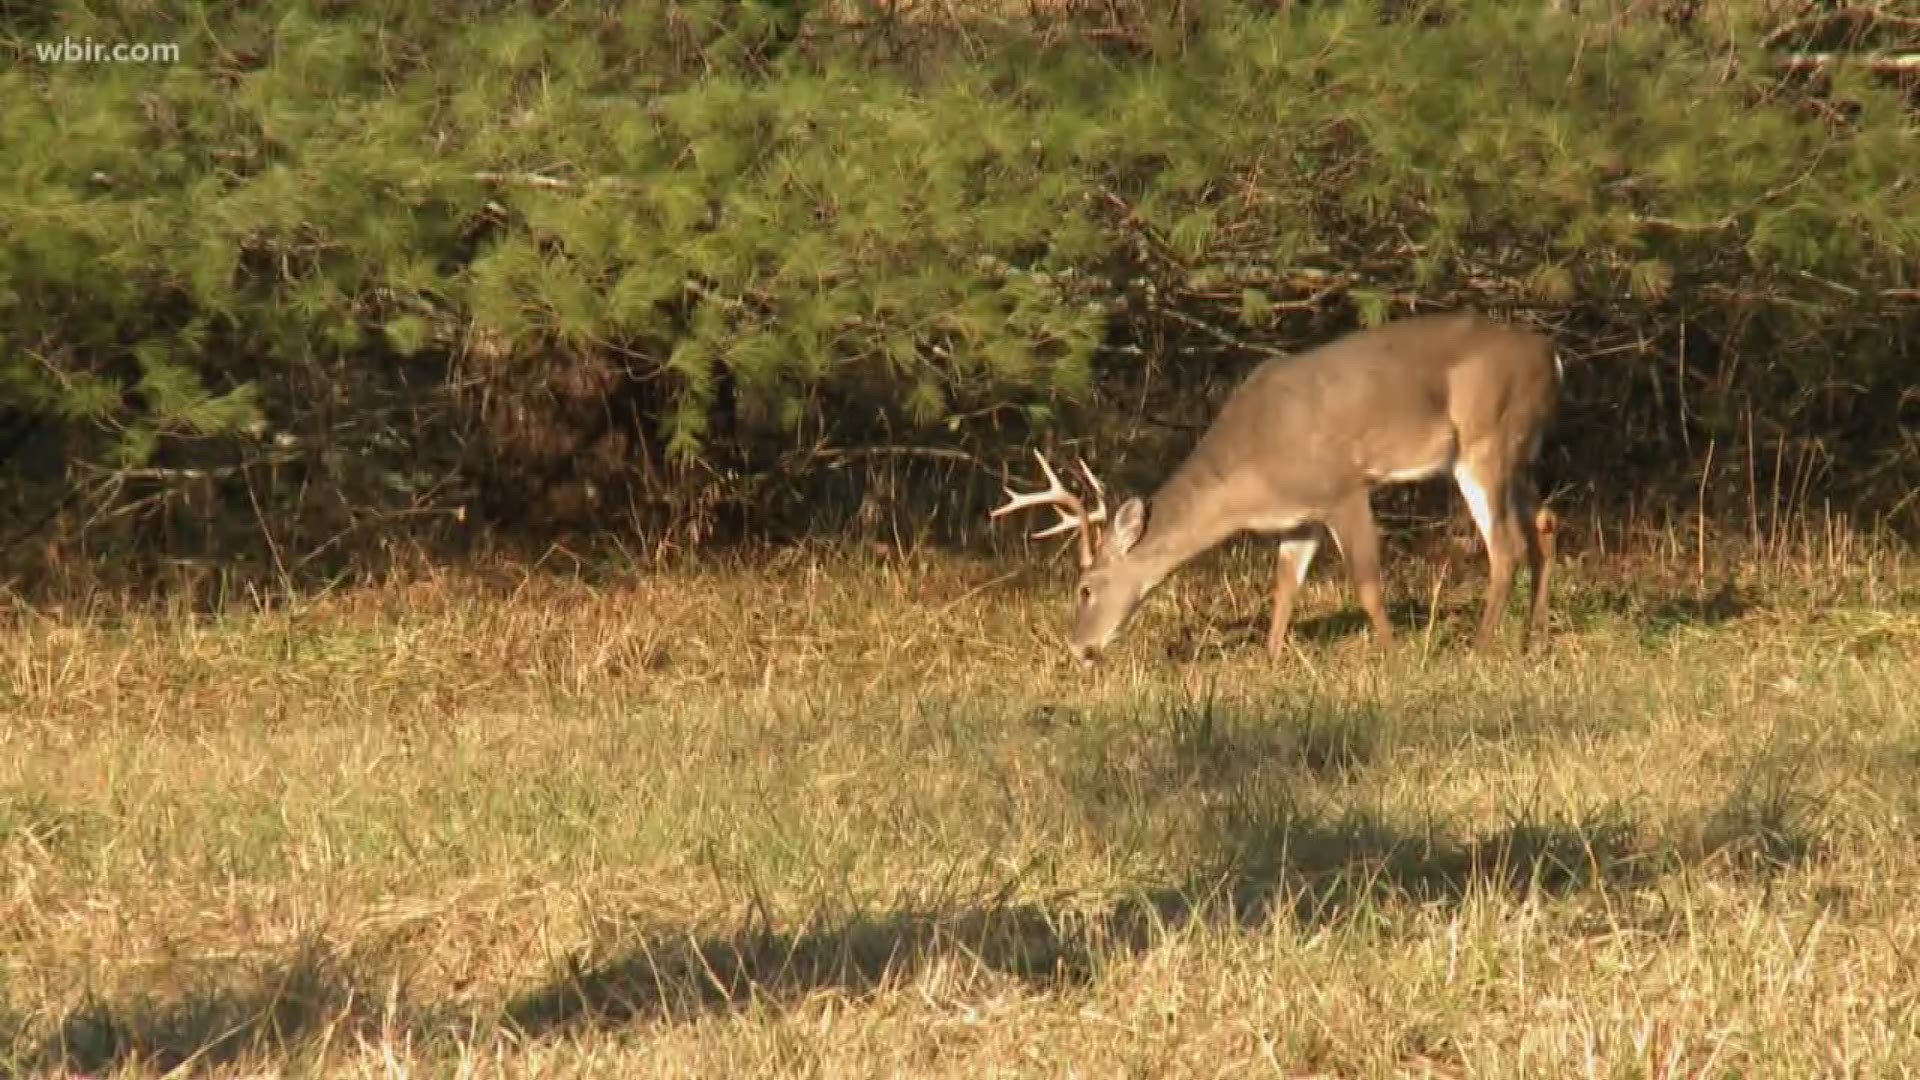 The Holston Army Ammunition Plant in Kingsport says an outbreak of epizootic hemorrhagic disease, or E-H-D, has killed too many deer to allow for hunting.